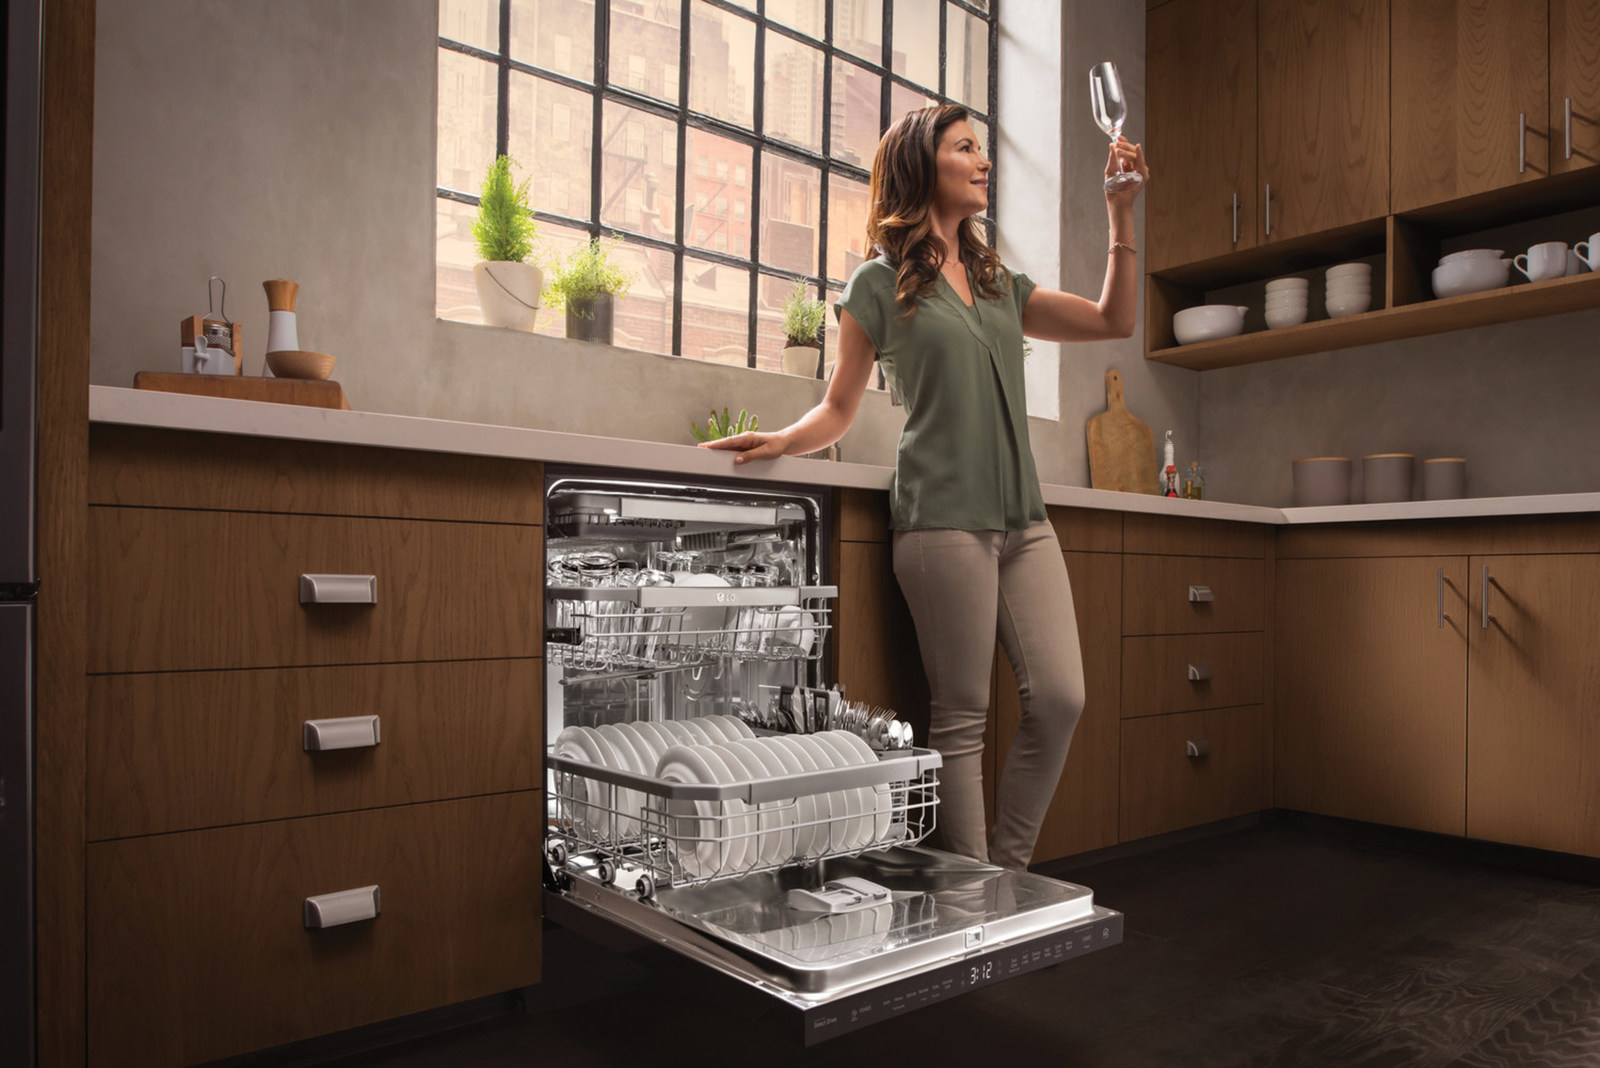 LG Brings QuadWash Technology and SmartThinQ to More Dishwashers